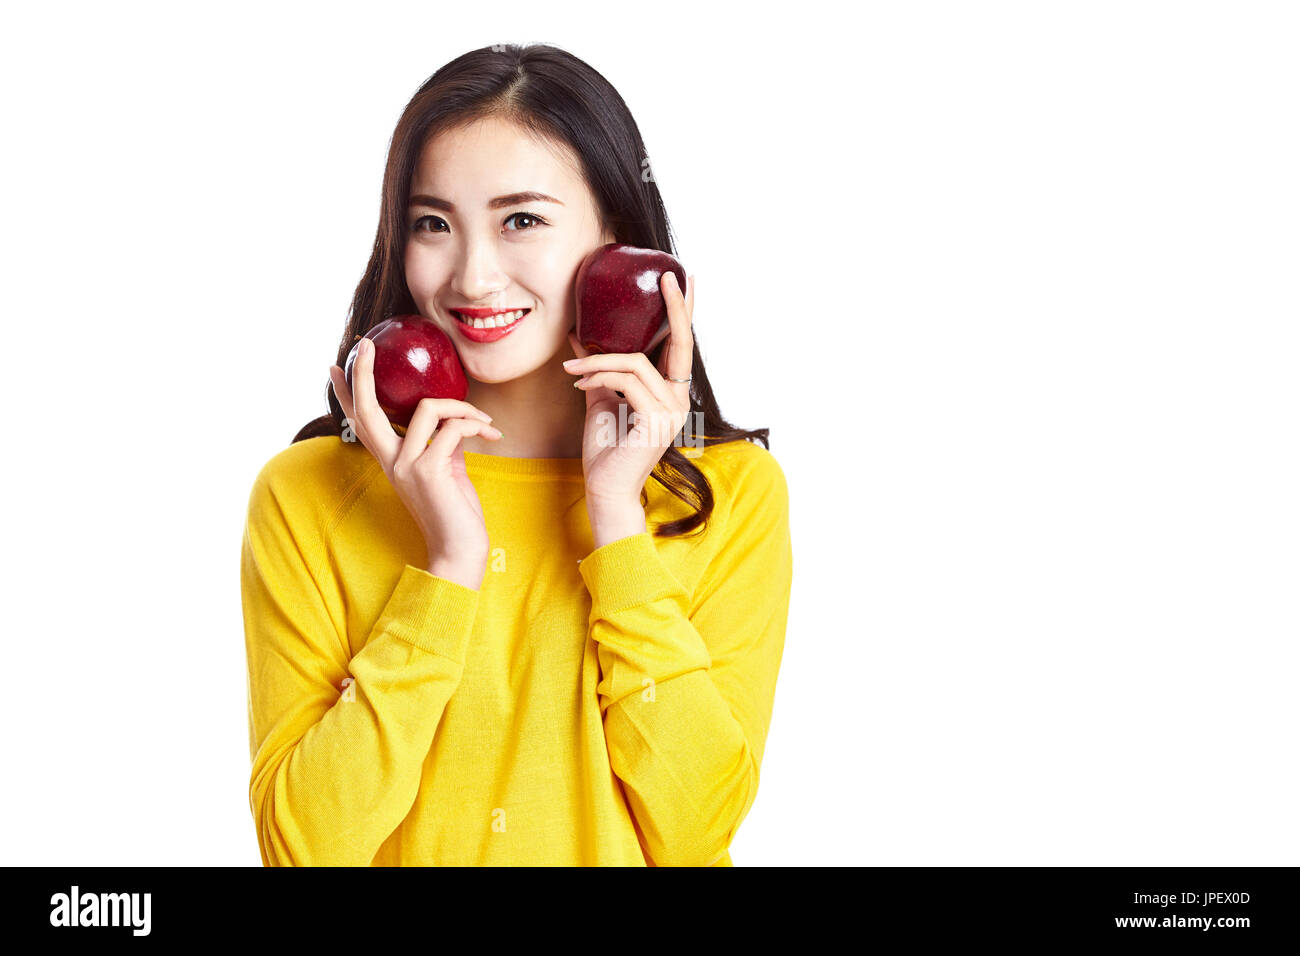 young and beautiful asian woman showing two red apples, isolated on white background. Stock Photo